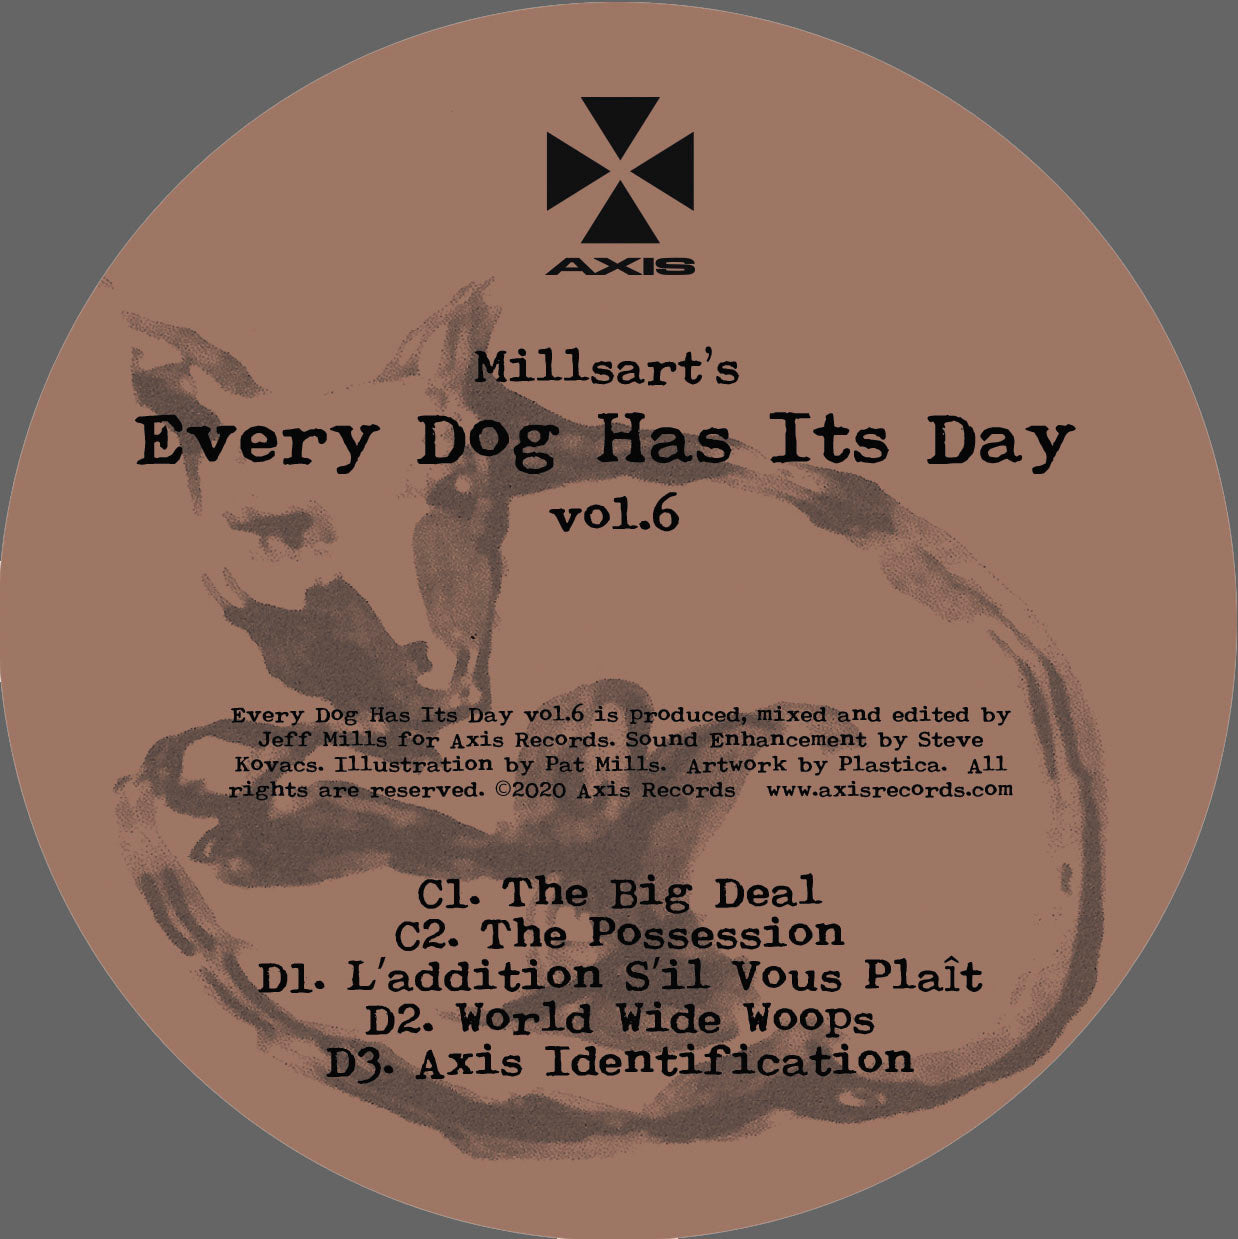 Every Dog Has Its Day Vol.6